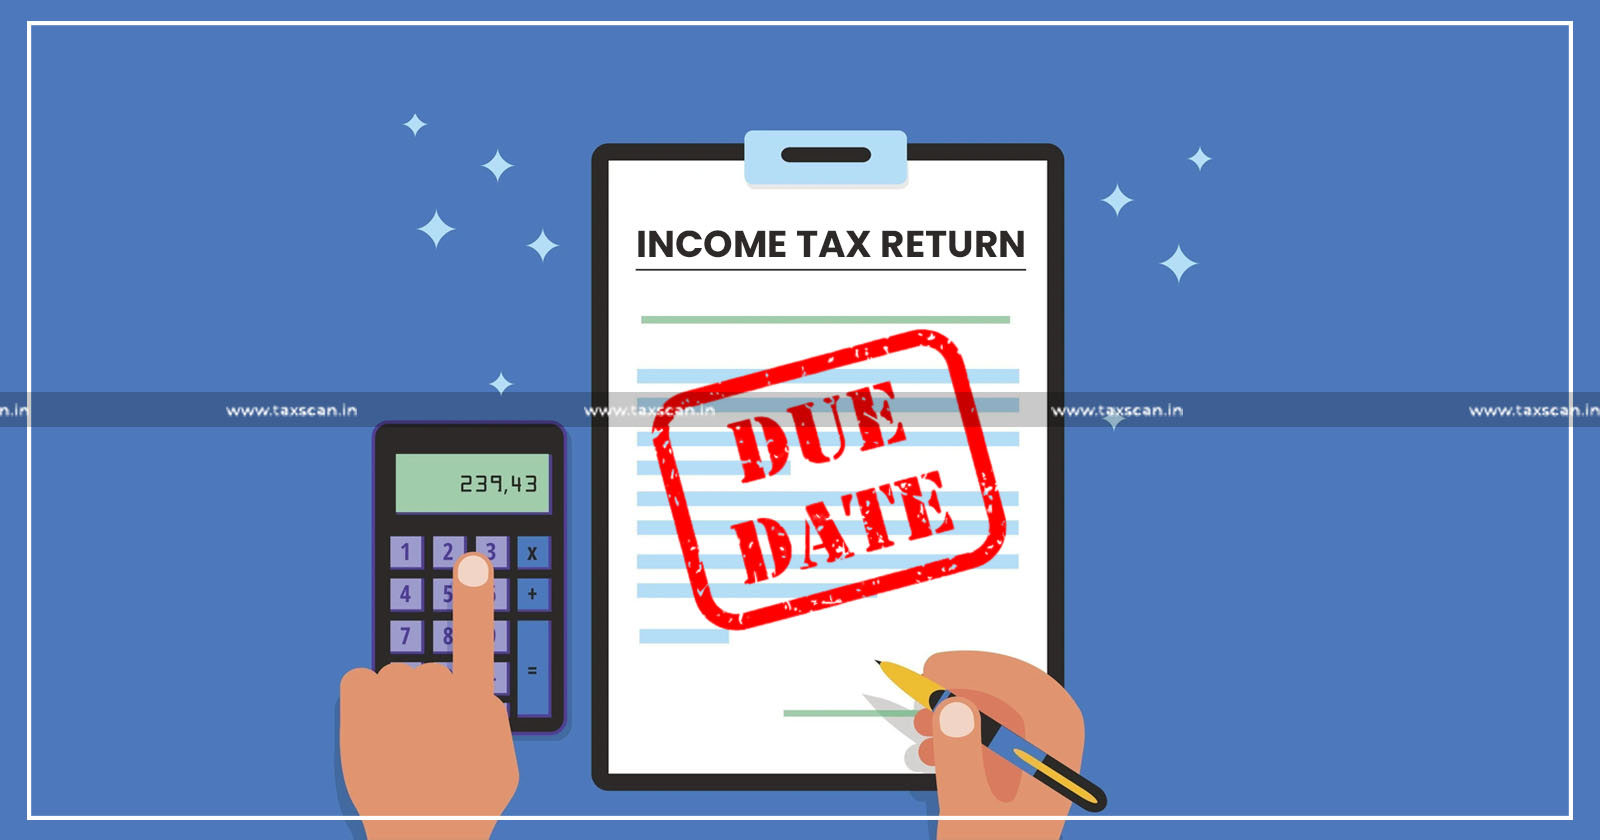 Income Tax Return Due Date will not be Extended - Revenue Secretary - Income Tax Return Due Date - Due Date - Taxscan